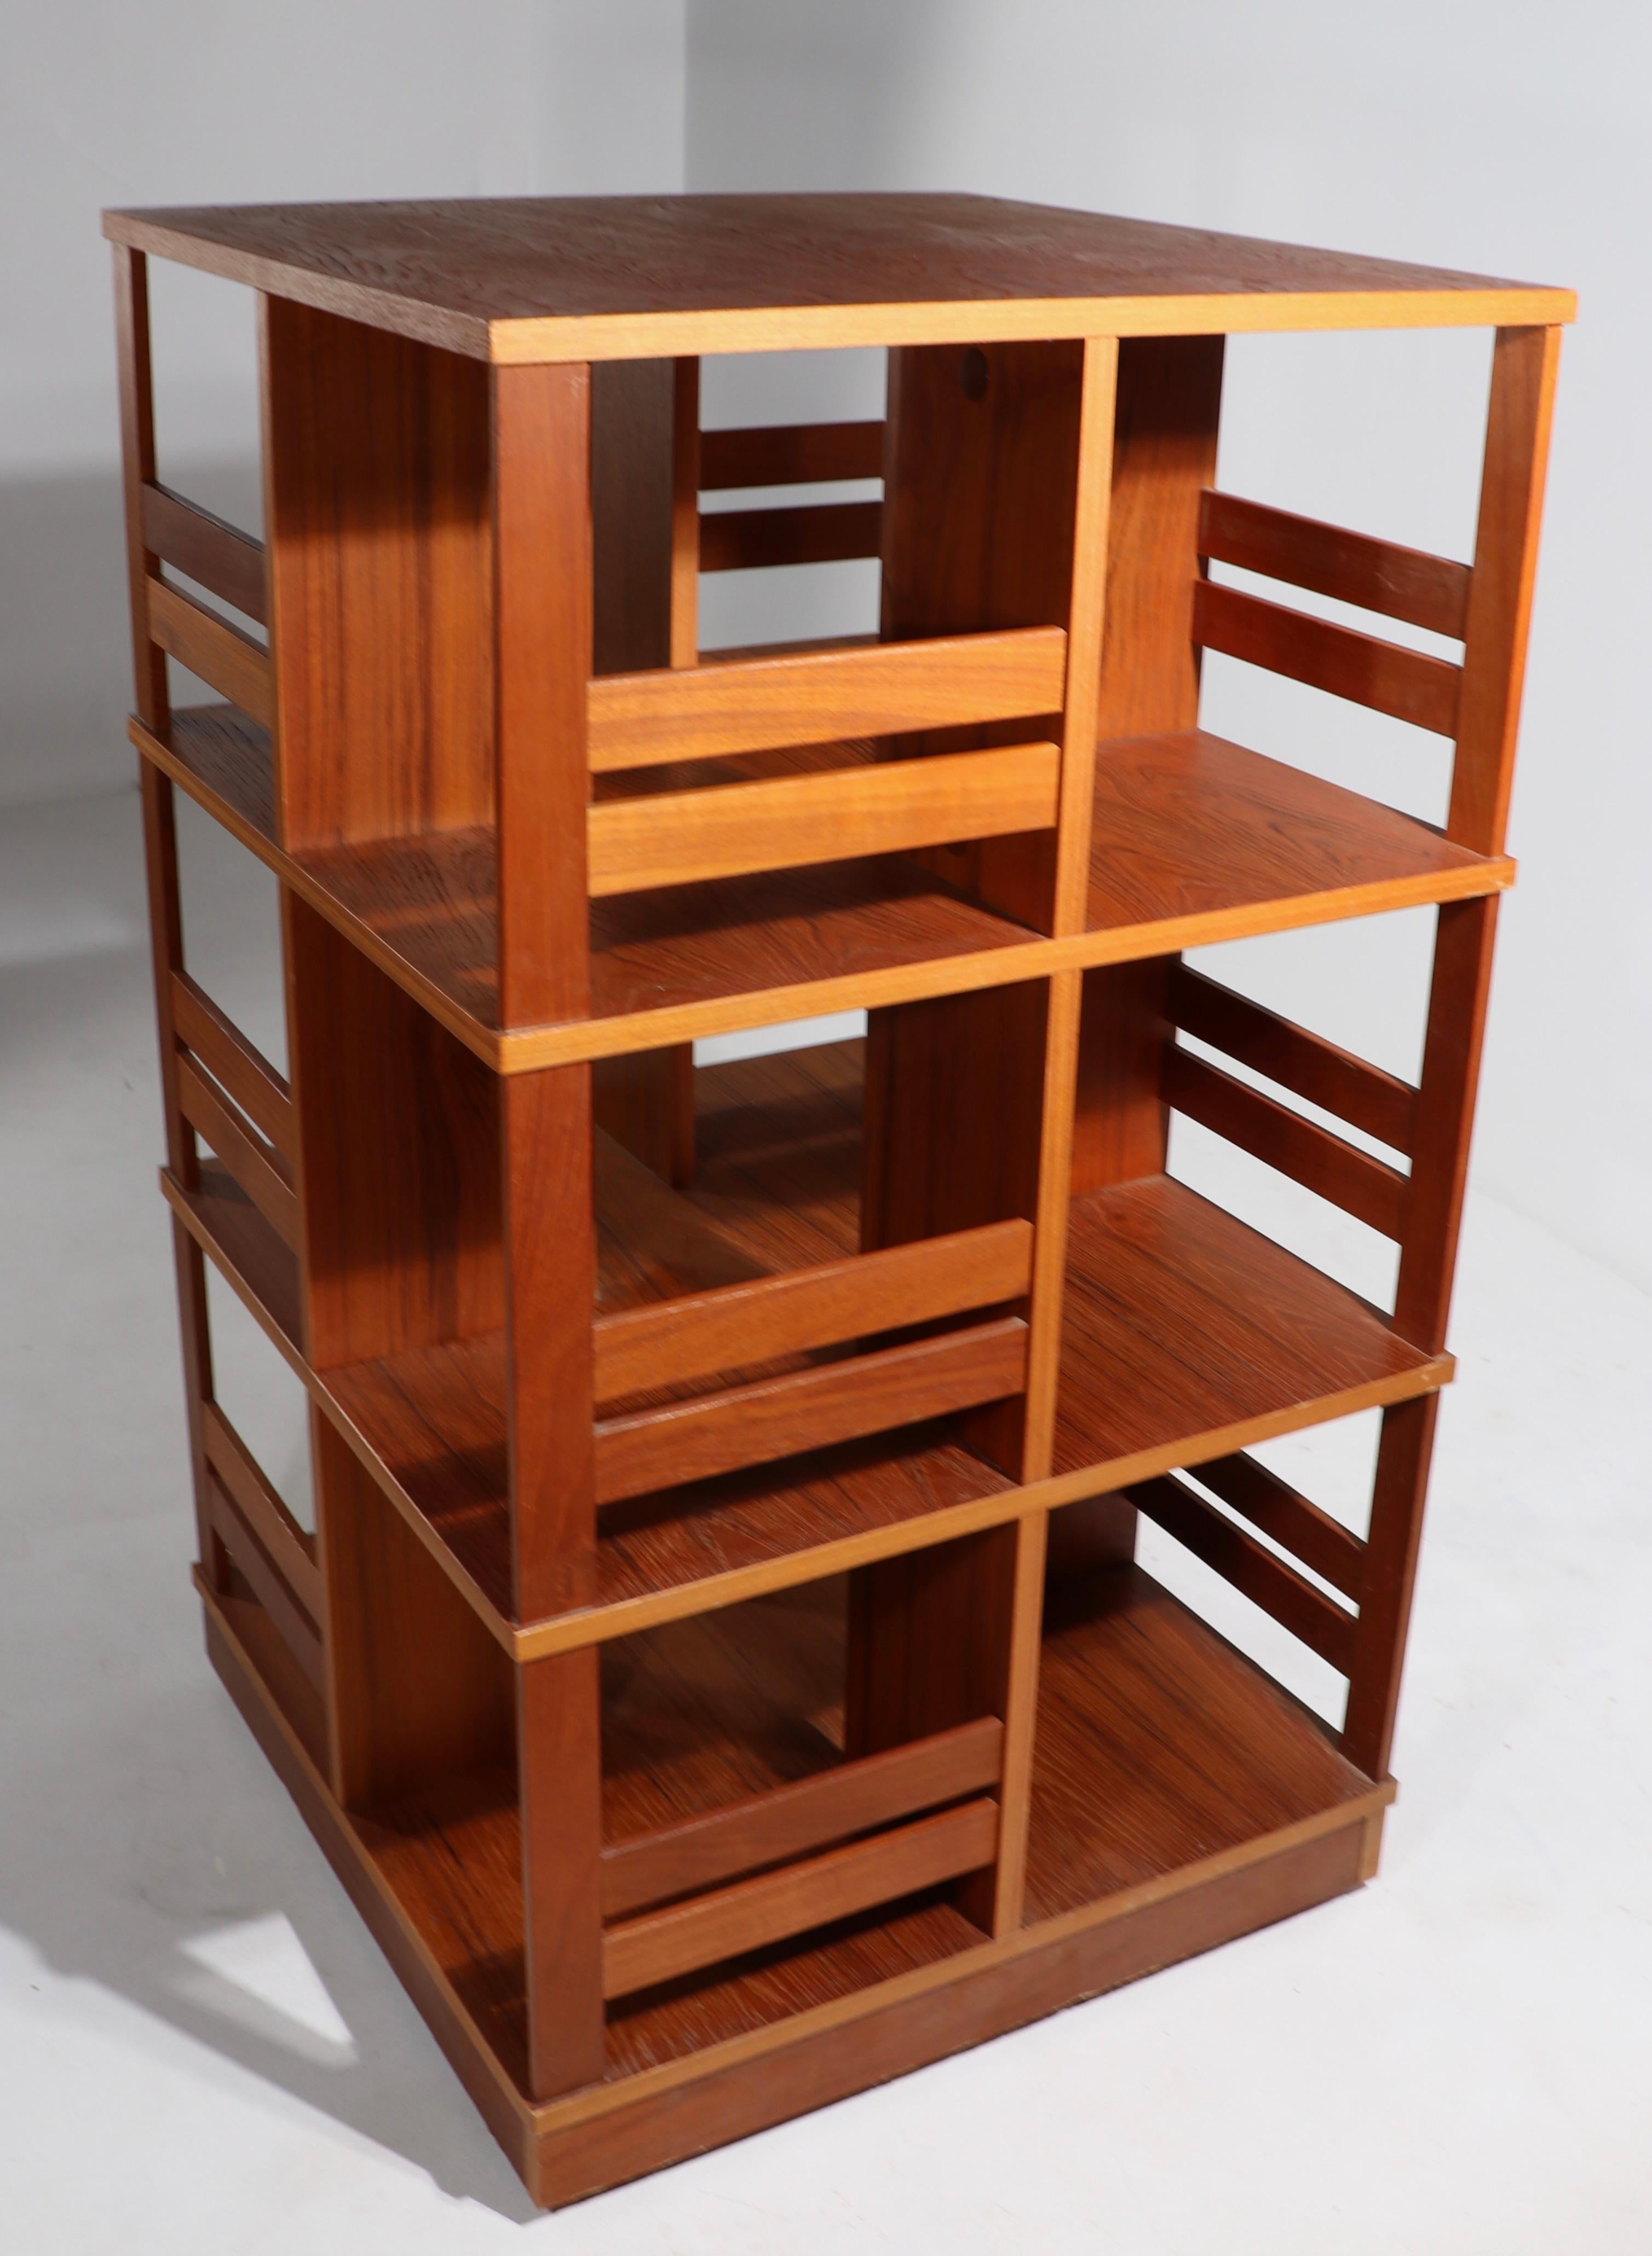 Incredible architectural scale revolving bookcase in teak, and teak veneer, executed in the Danish Modern style circa 1960's. We have 2 matching bookcases available - unusual and rare opportunity to purchase a matching pair, perfect for a large